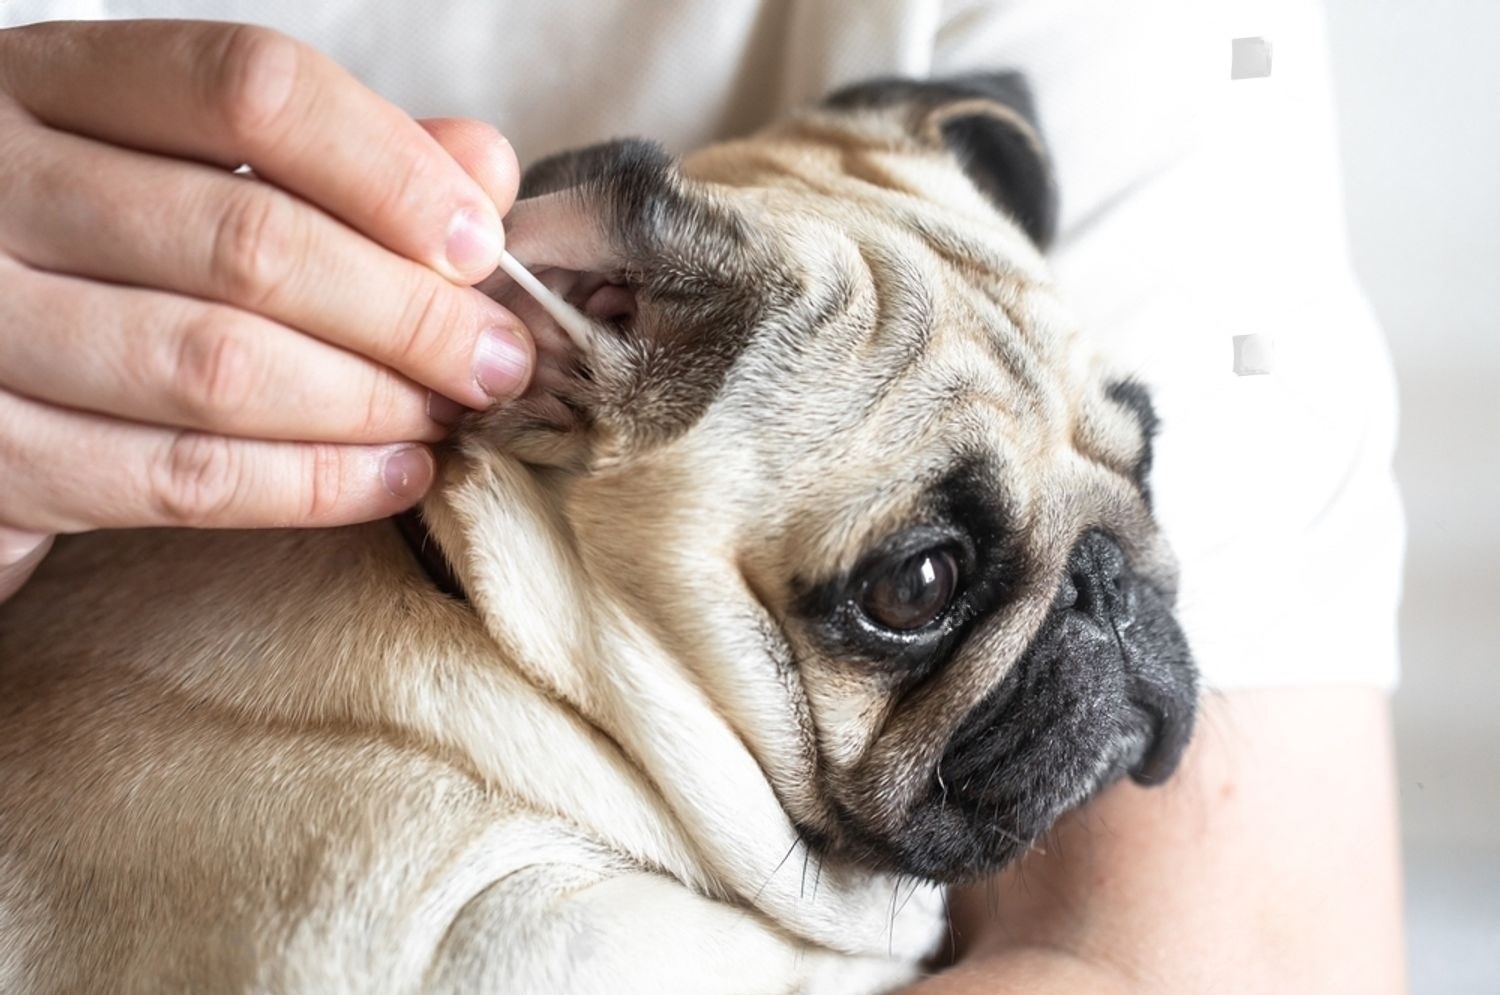 How to Soothe Your Dog's Ears After Grooming